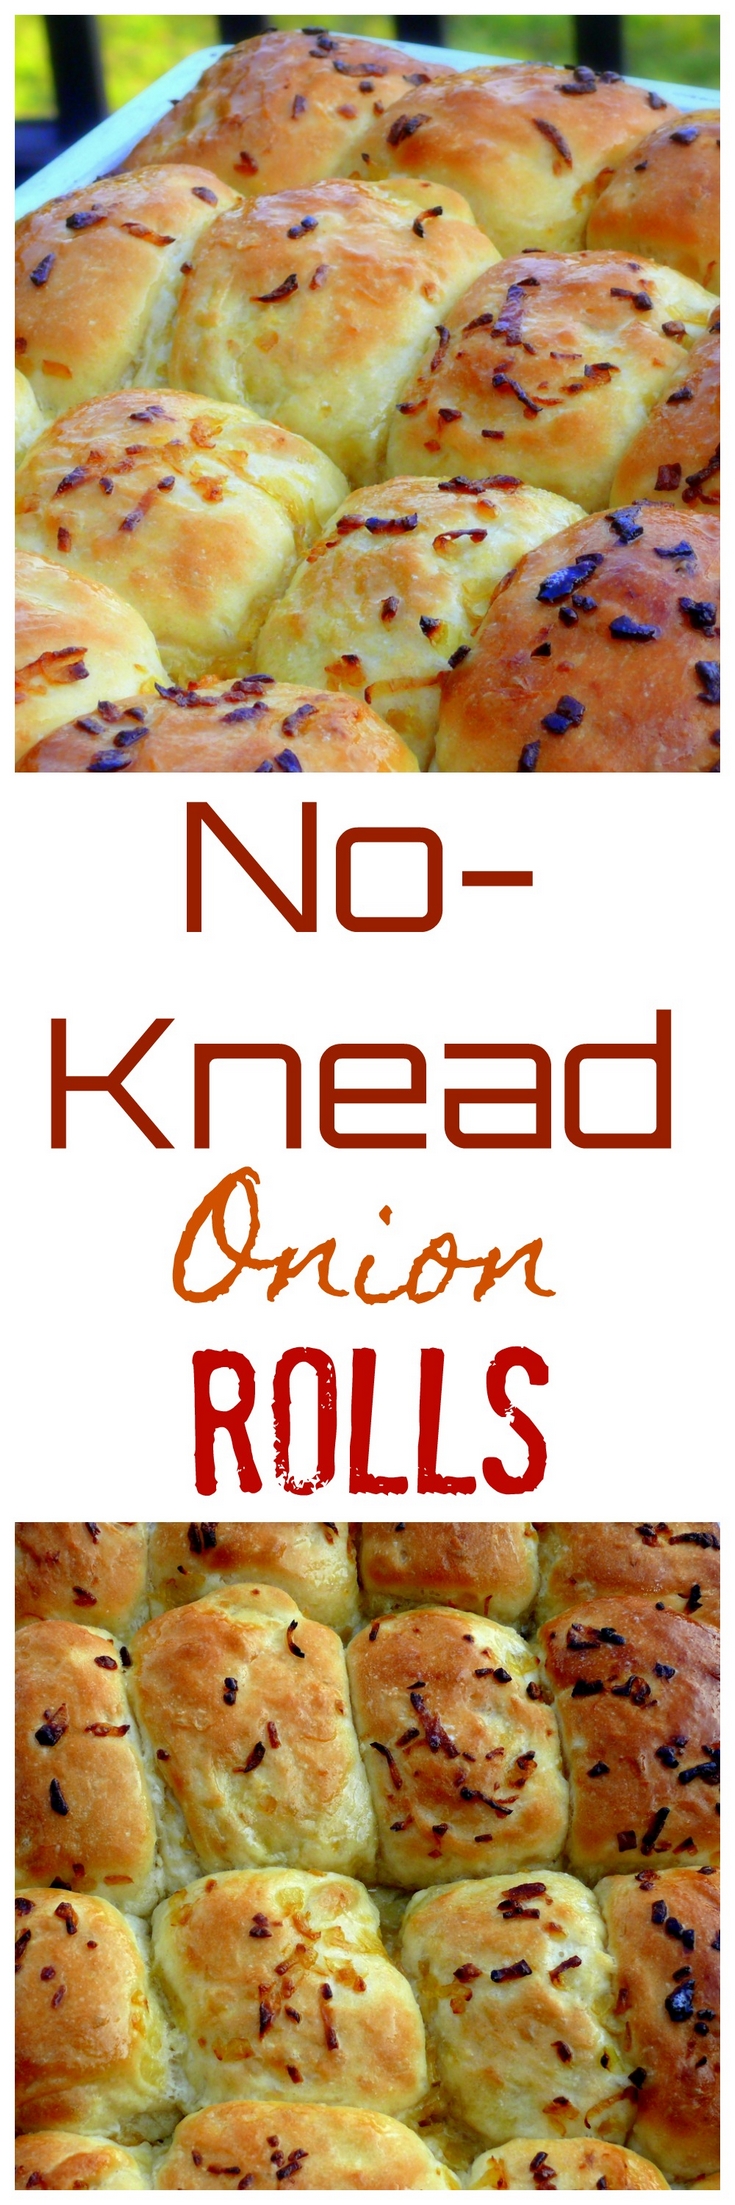 VIDEO + RECIPE: Soft and airy, these No-Knead Onion Rolls are the perfect addition to any dinner or lunch menu. It couldn't be easier than making the dough, letting it rise and shaping into balls for the oven. They make perfect slider buns too, from NoblePig.com. via @cmpollak1